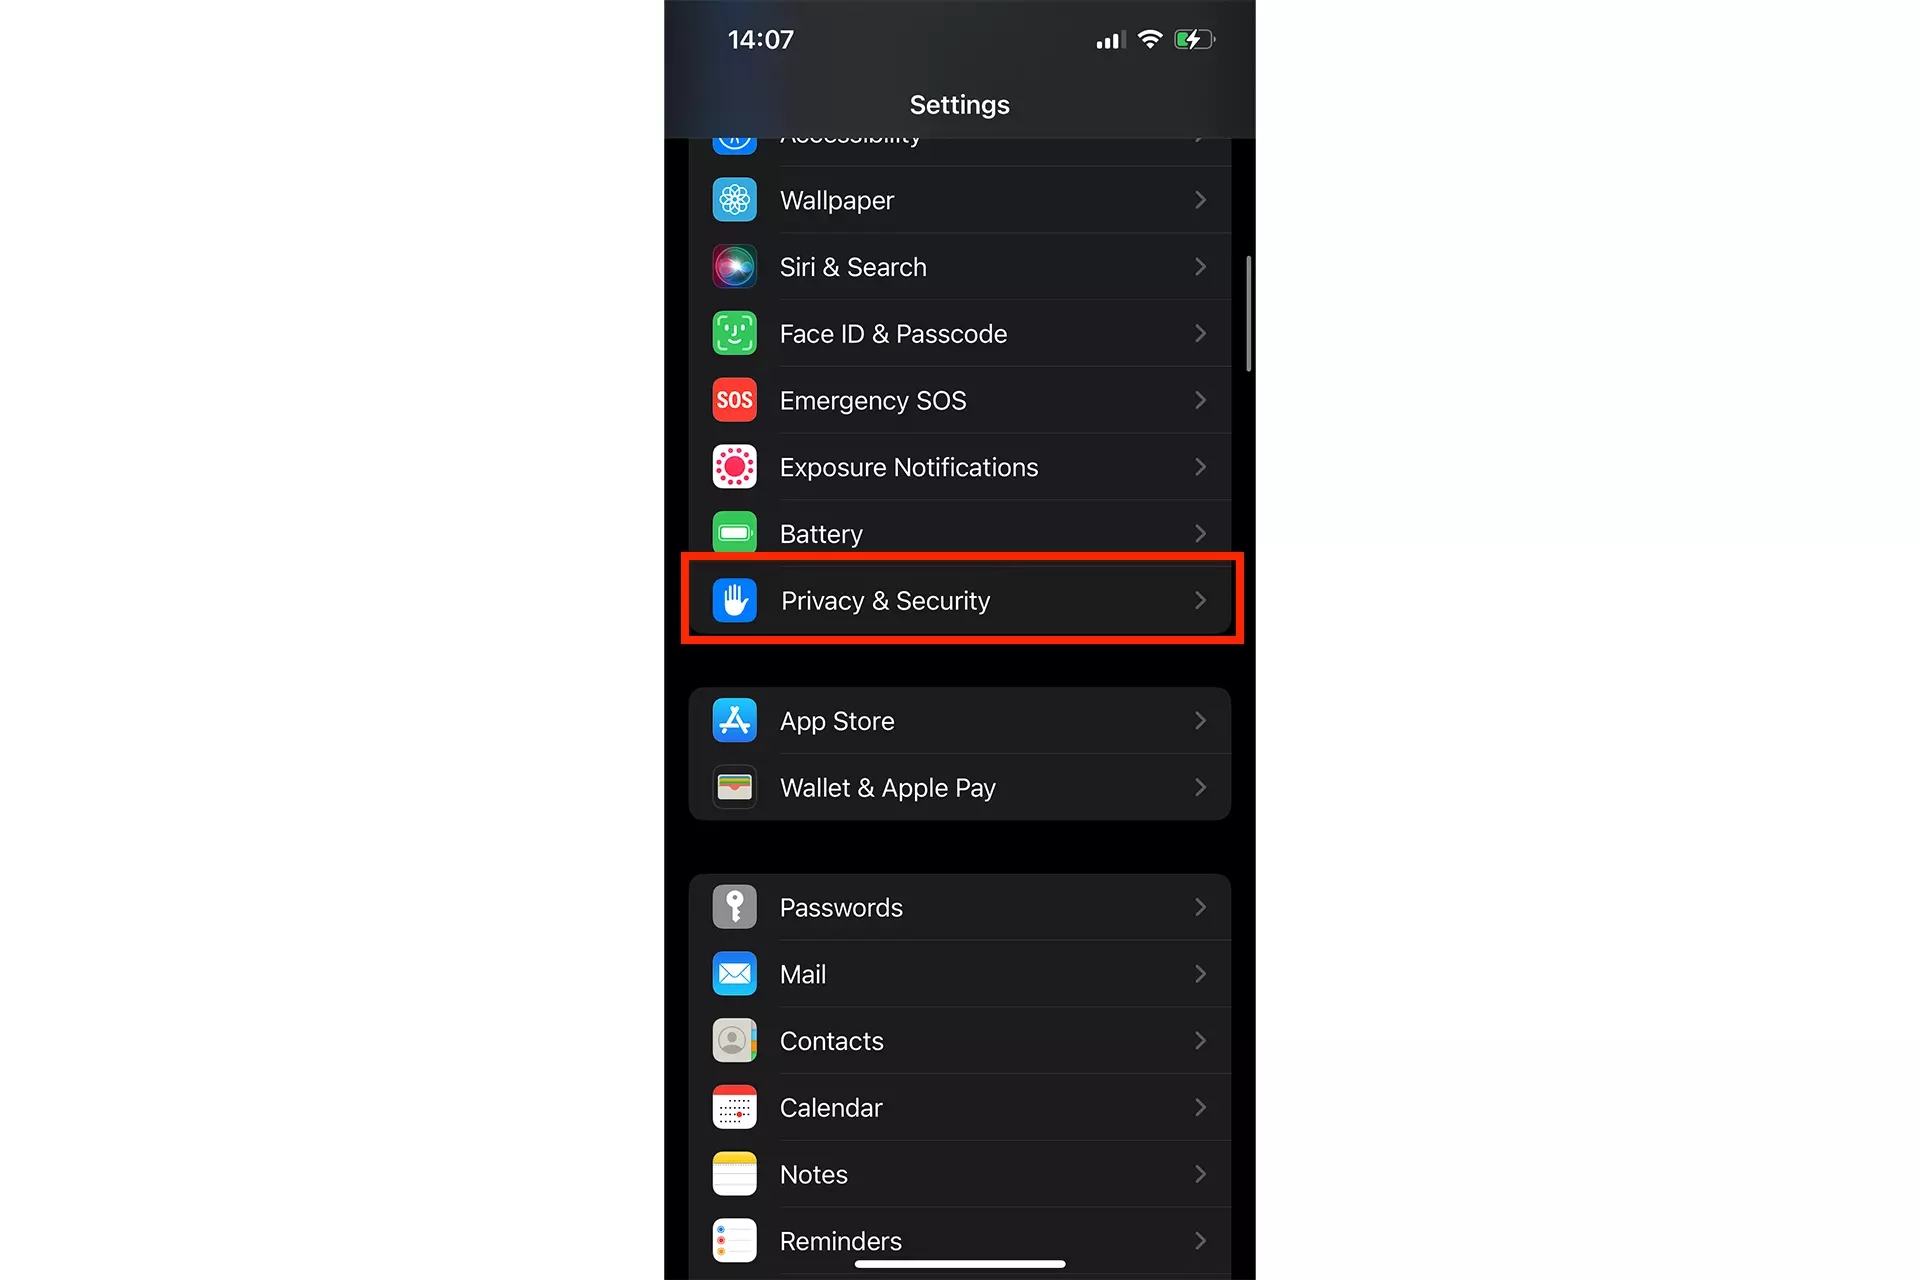 A screenshot of the settings app on iPhone, with a highlight on the Privacy & Security menu option.